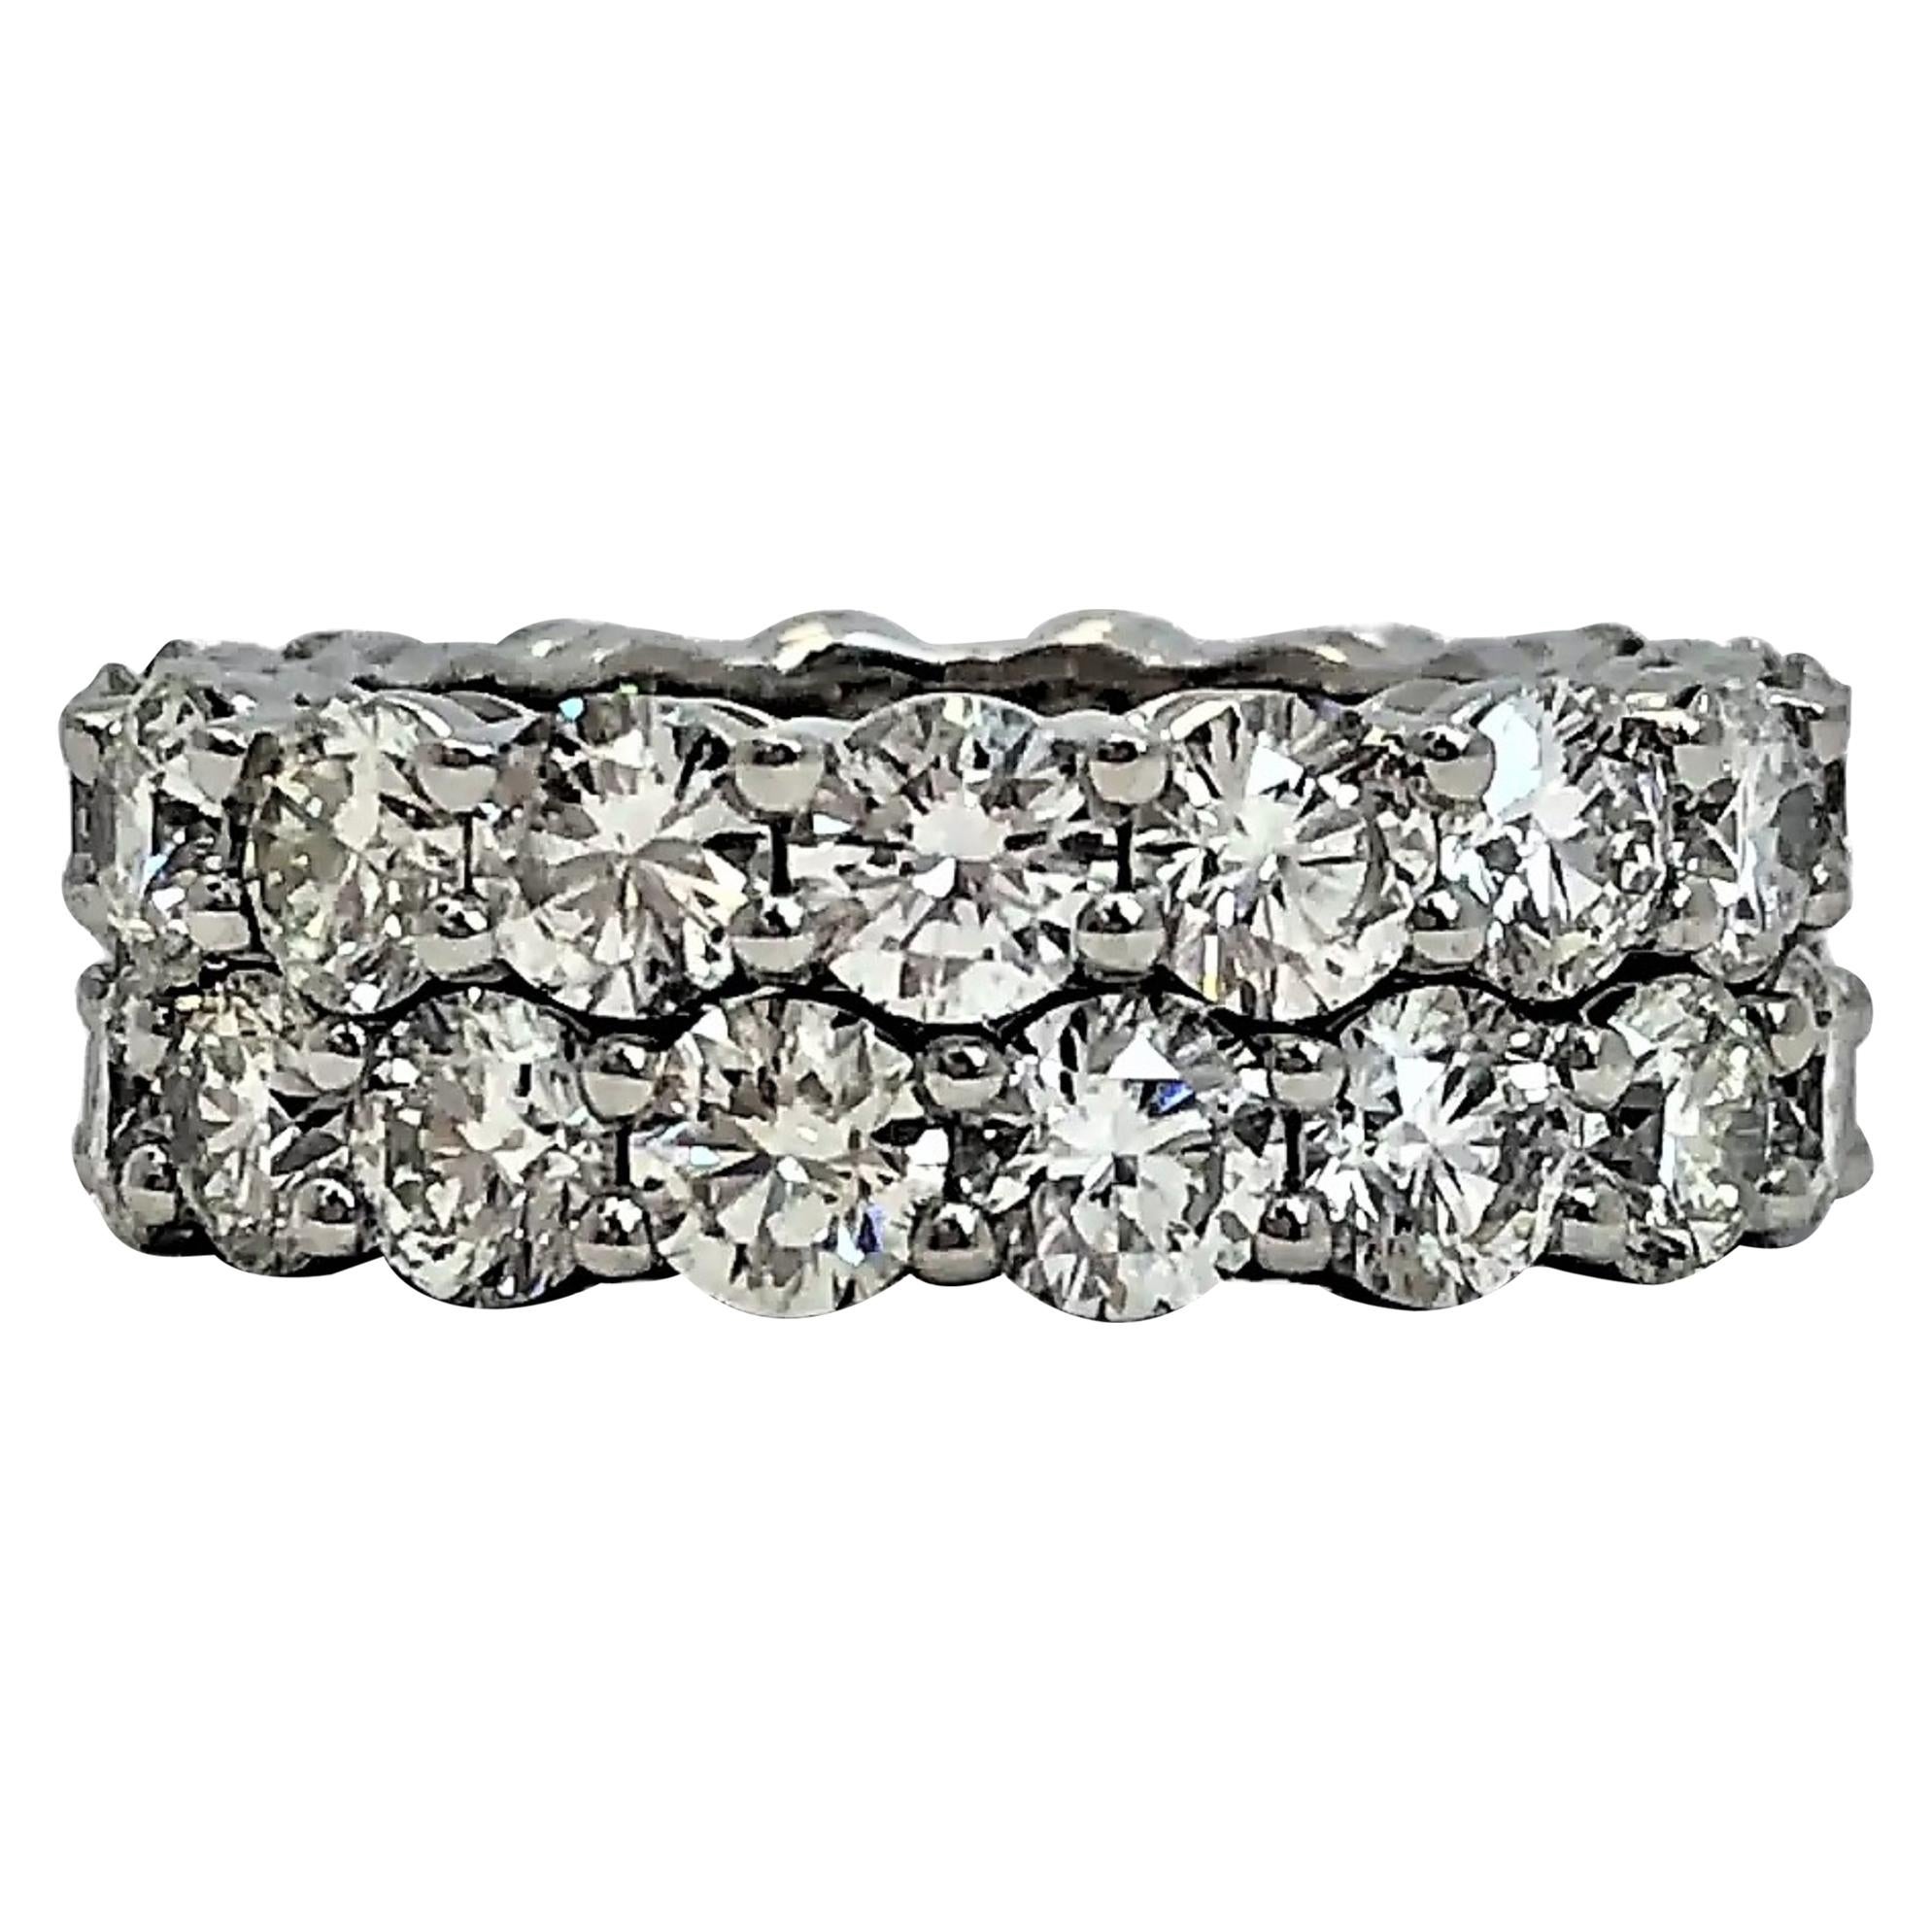 Pair of Platinum Common Prong Eternity Bands 8.70 Carat Total Weight